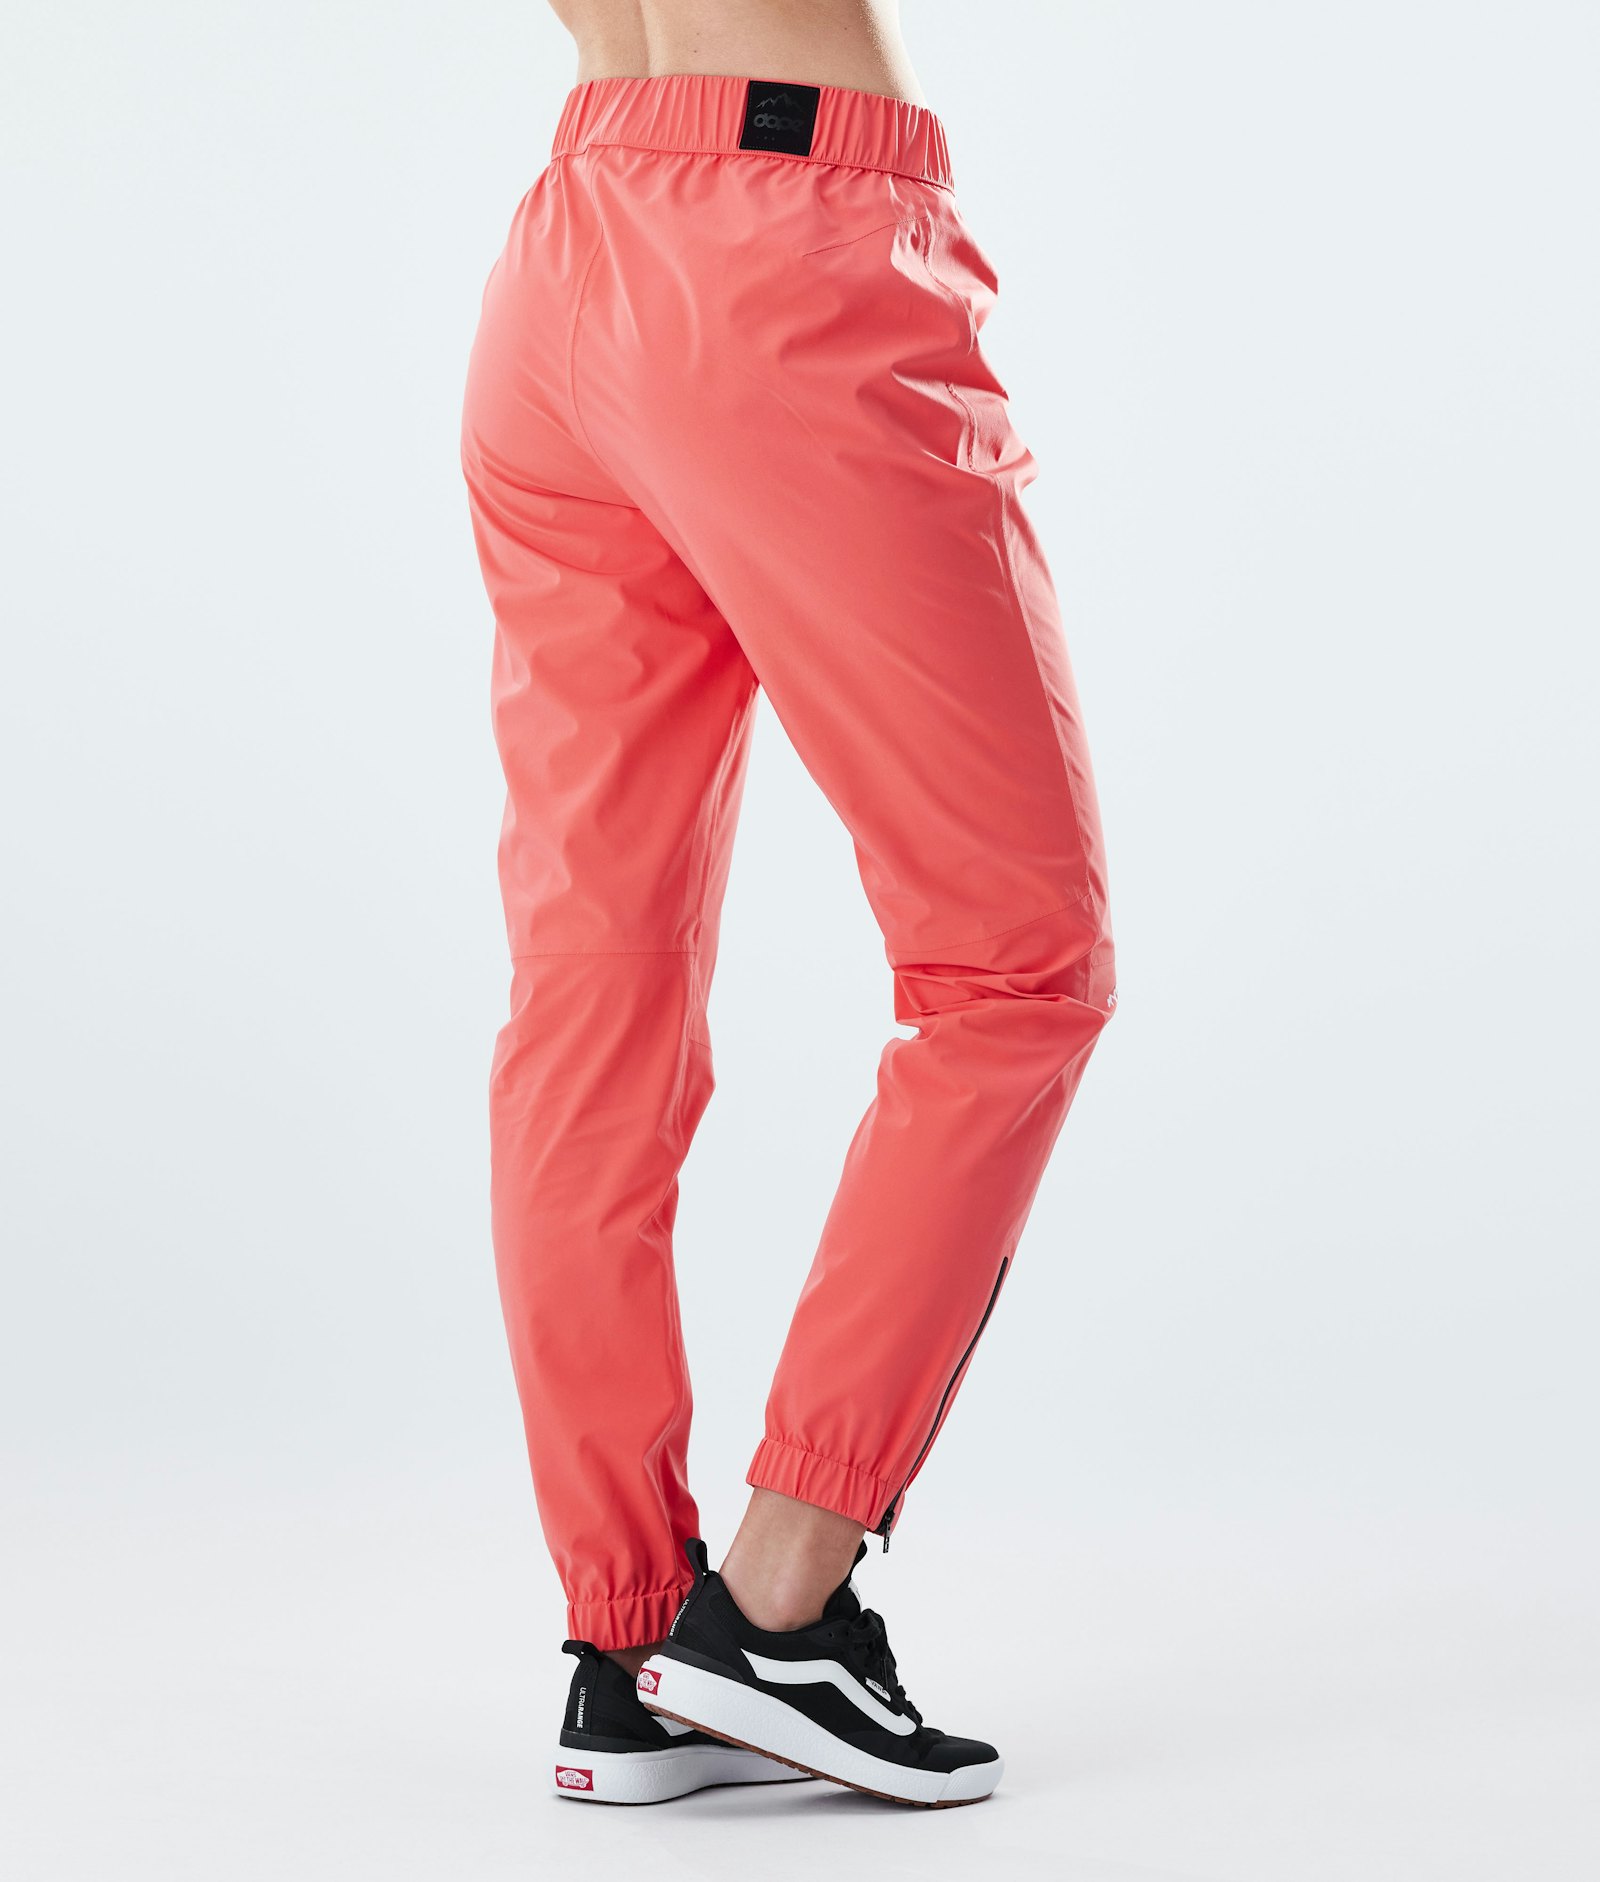 Drizzard W Pantalones Impermeables Mujer Coral